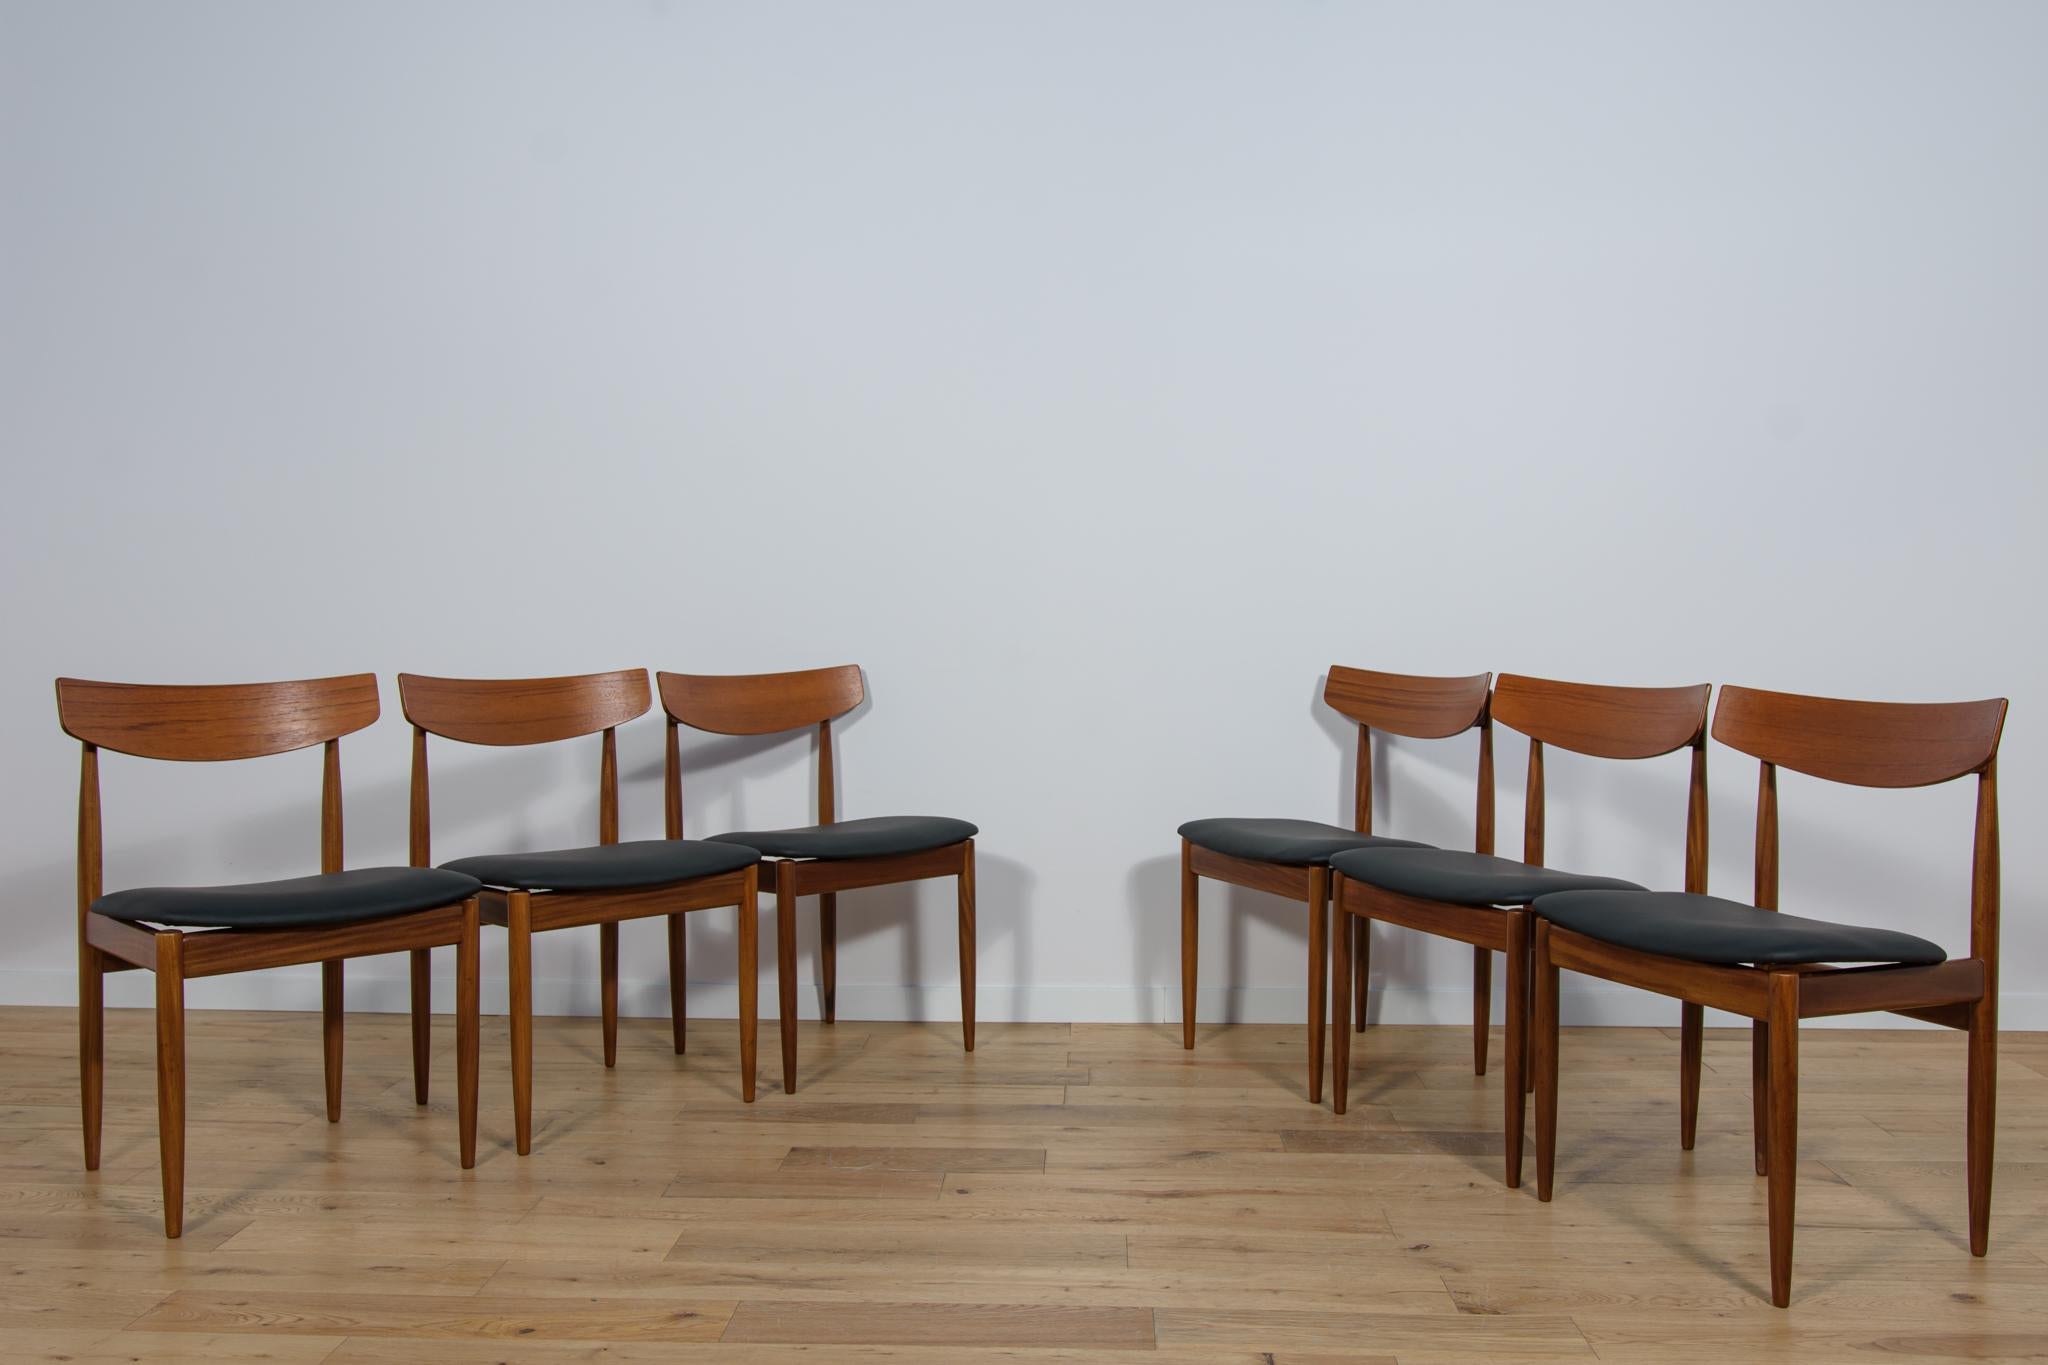 Leather Mid-Century Dining Chairs in Teak by Ib Kofod Larsen for G-Plan, 1960s.